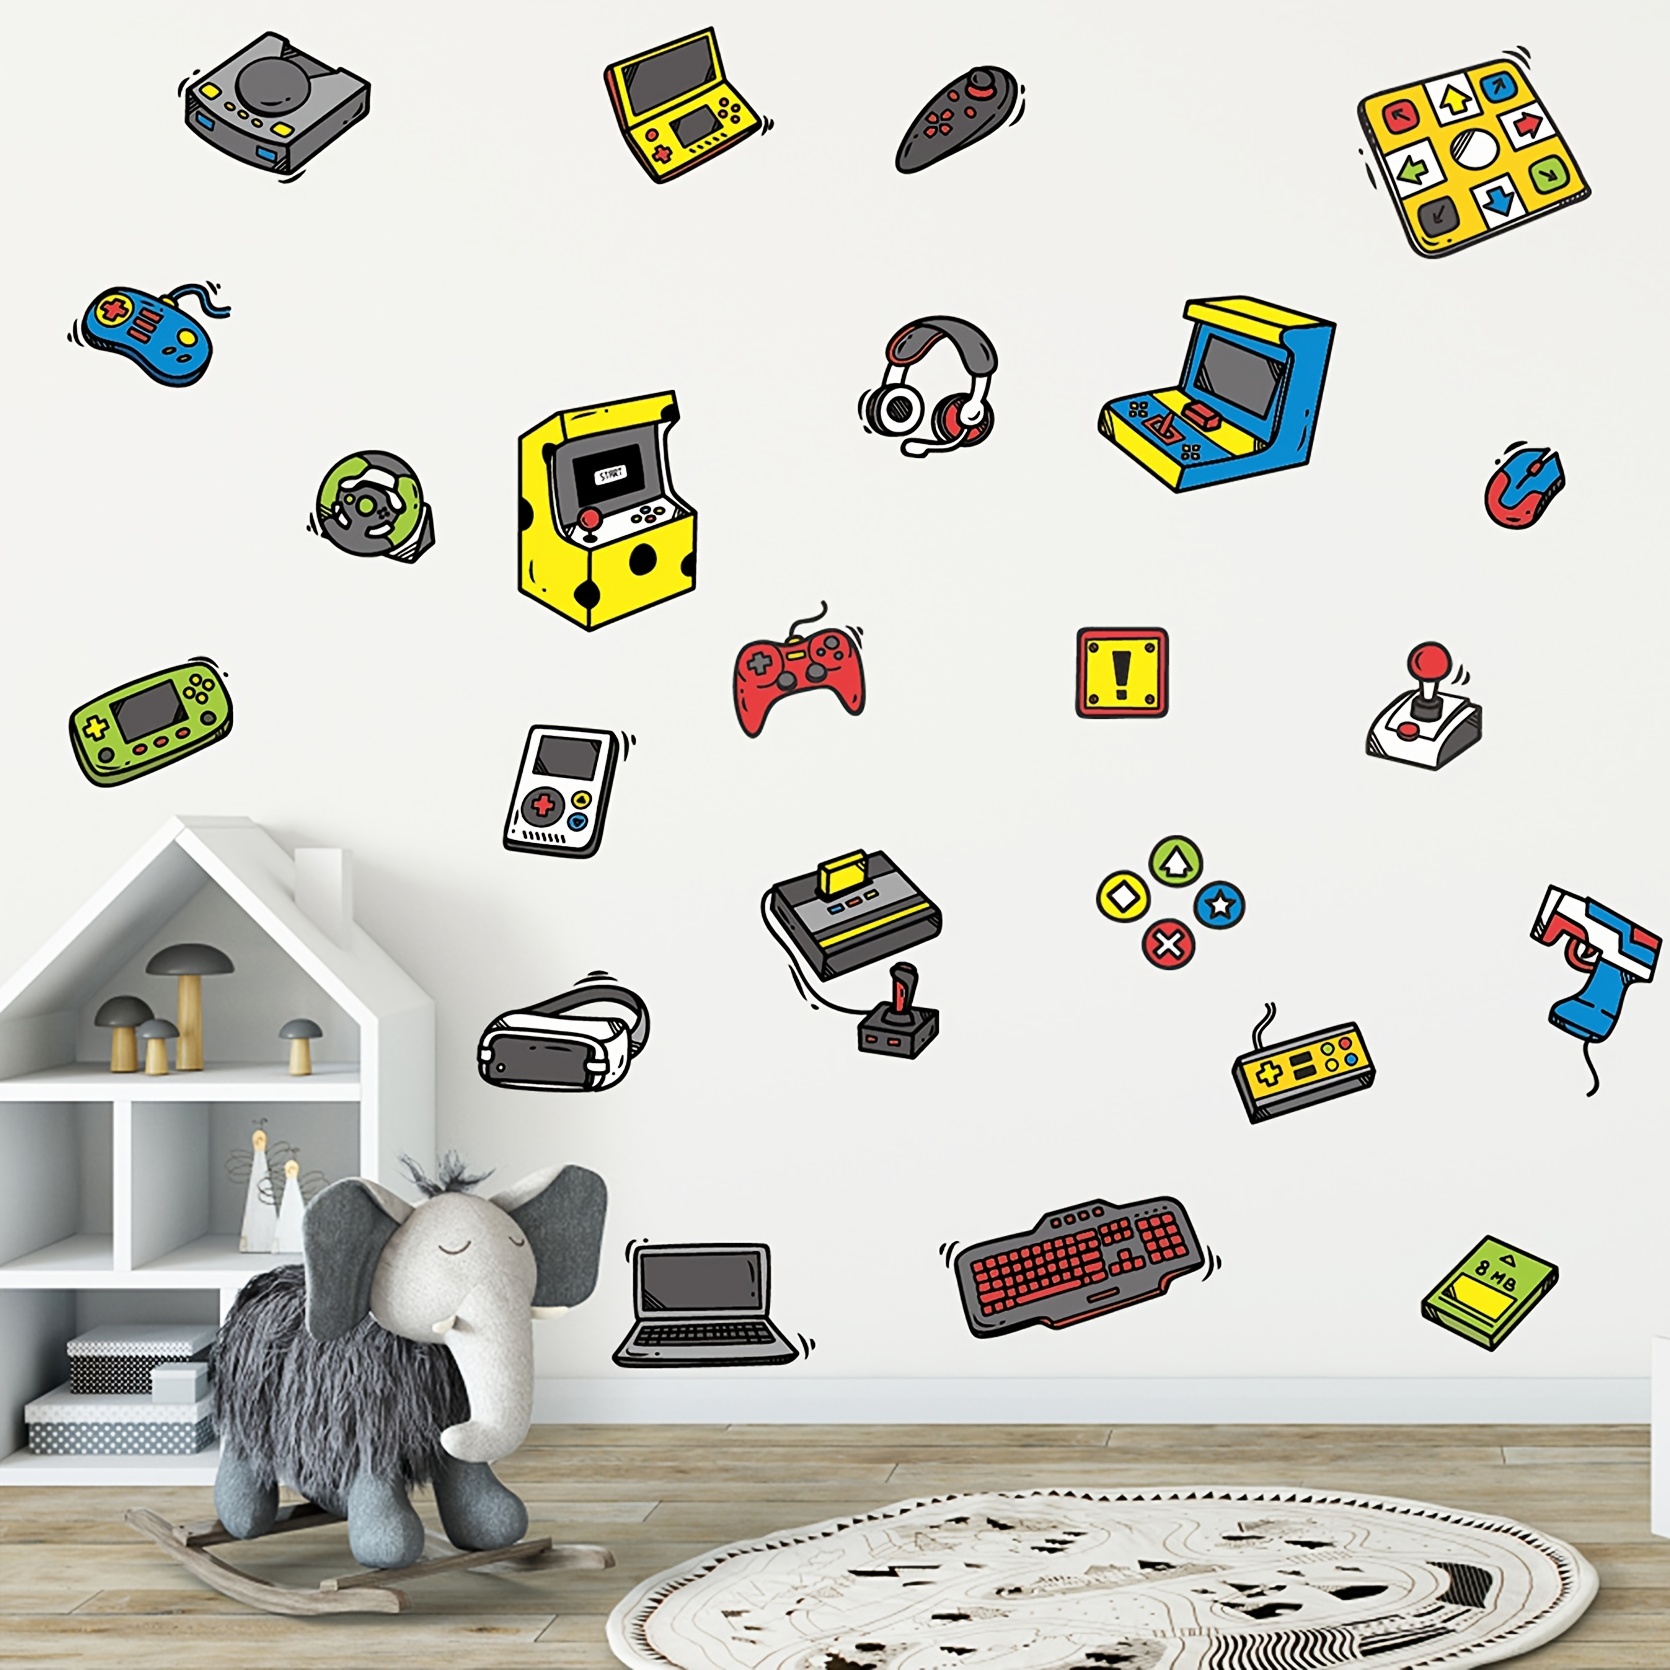 Vinyl Wall Decal Gamer Vs Joystick Video Game Play Room Stickers